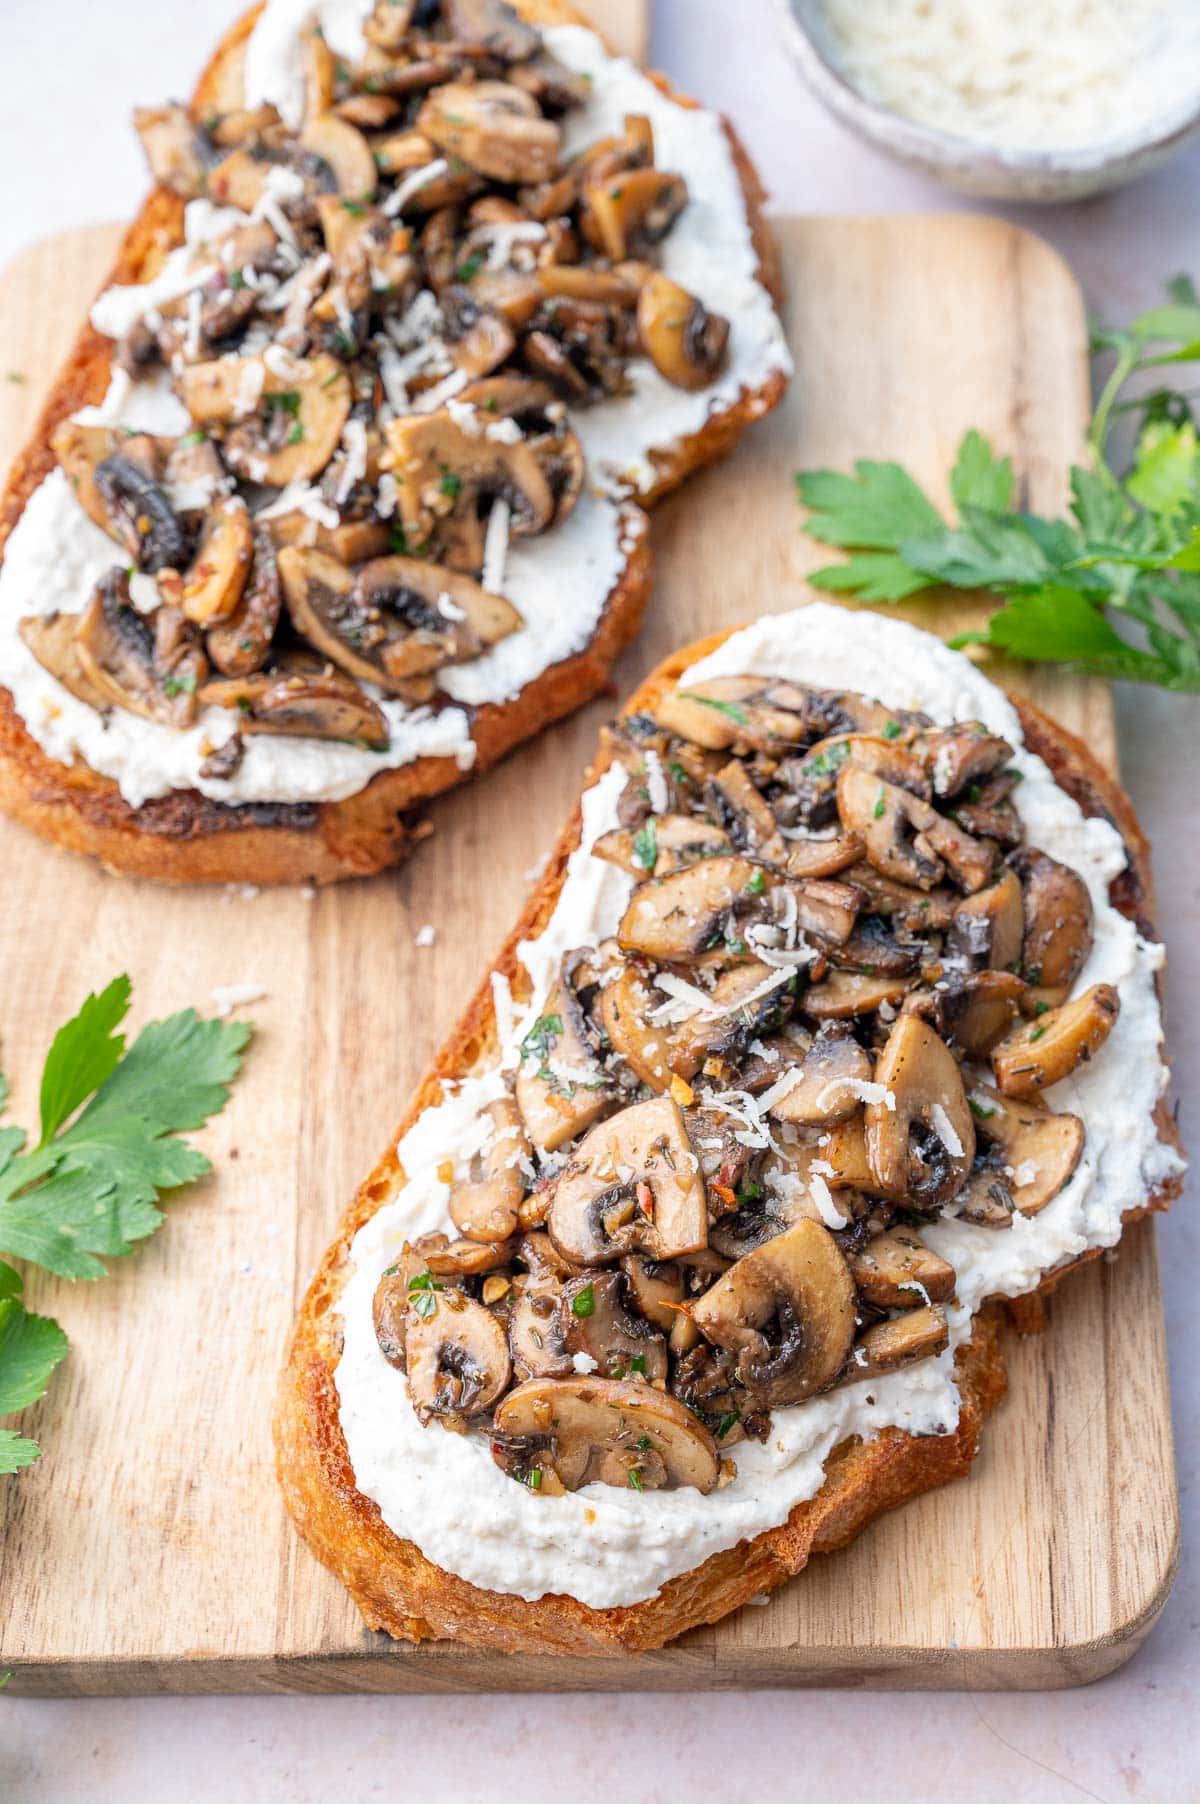 Two mushroom toasts on a wooden board.